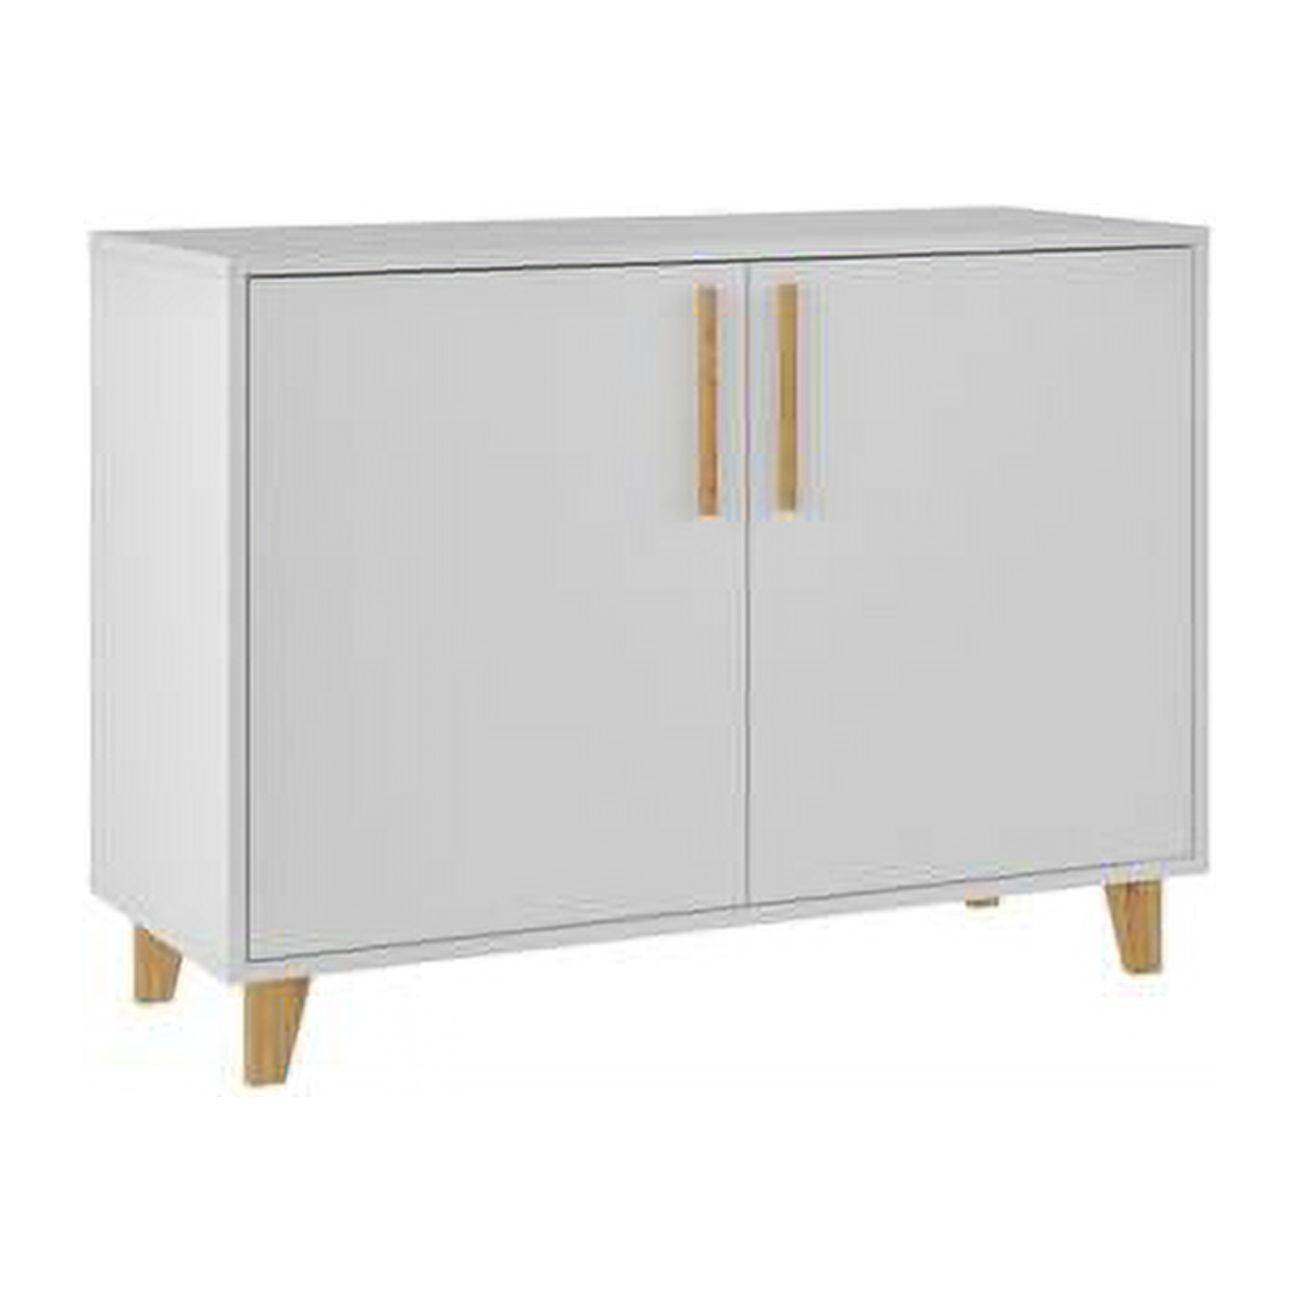 Elegant White Mid-Century Modern Herald Side Cabinet with Solid Pine Legs